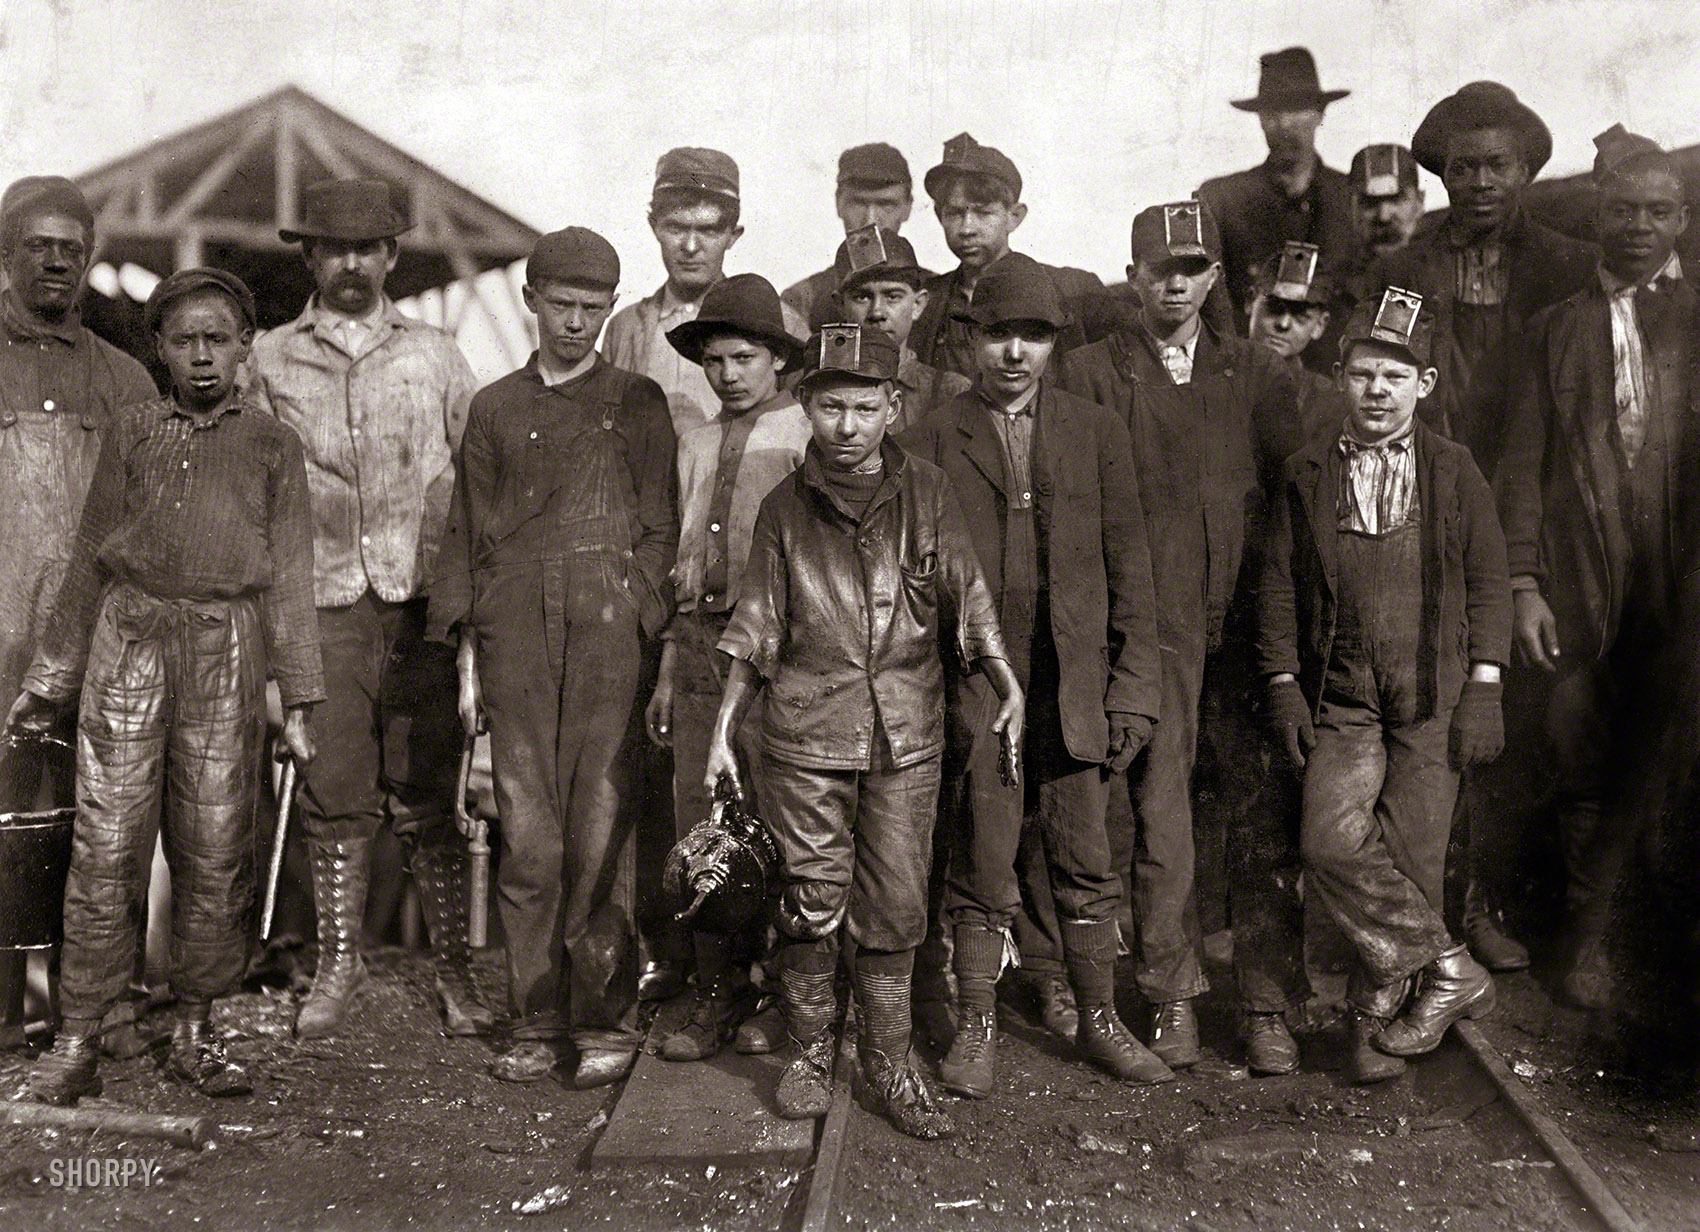 &nbsp; &nbsp; &nbsp; &nbsp; On Shorpy.com's seventh birthday, a look back at our namesake, the teenage mine greaser Shorpy Higginbotham, shown here in 1910 at age 14. His life was cut short by a mine accident in 1928, when he was crushed by a rock.
December 1910. Jefferson County, Alabama. "Shorpy Higginbotham, a 'greaser' on the tipple at Bessie Mine, of the Sloss-Sheffield Steel and Iron Co. Said he was 14 years old, but it is doubtful. Carries two heavy pails of grease, and is often in danger of being run over by the coal cars." Photograph by Lewis Wickes Hine for the National Child Labor Committee. View full size.